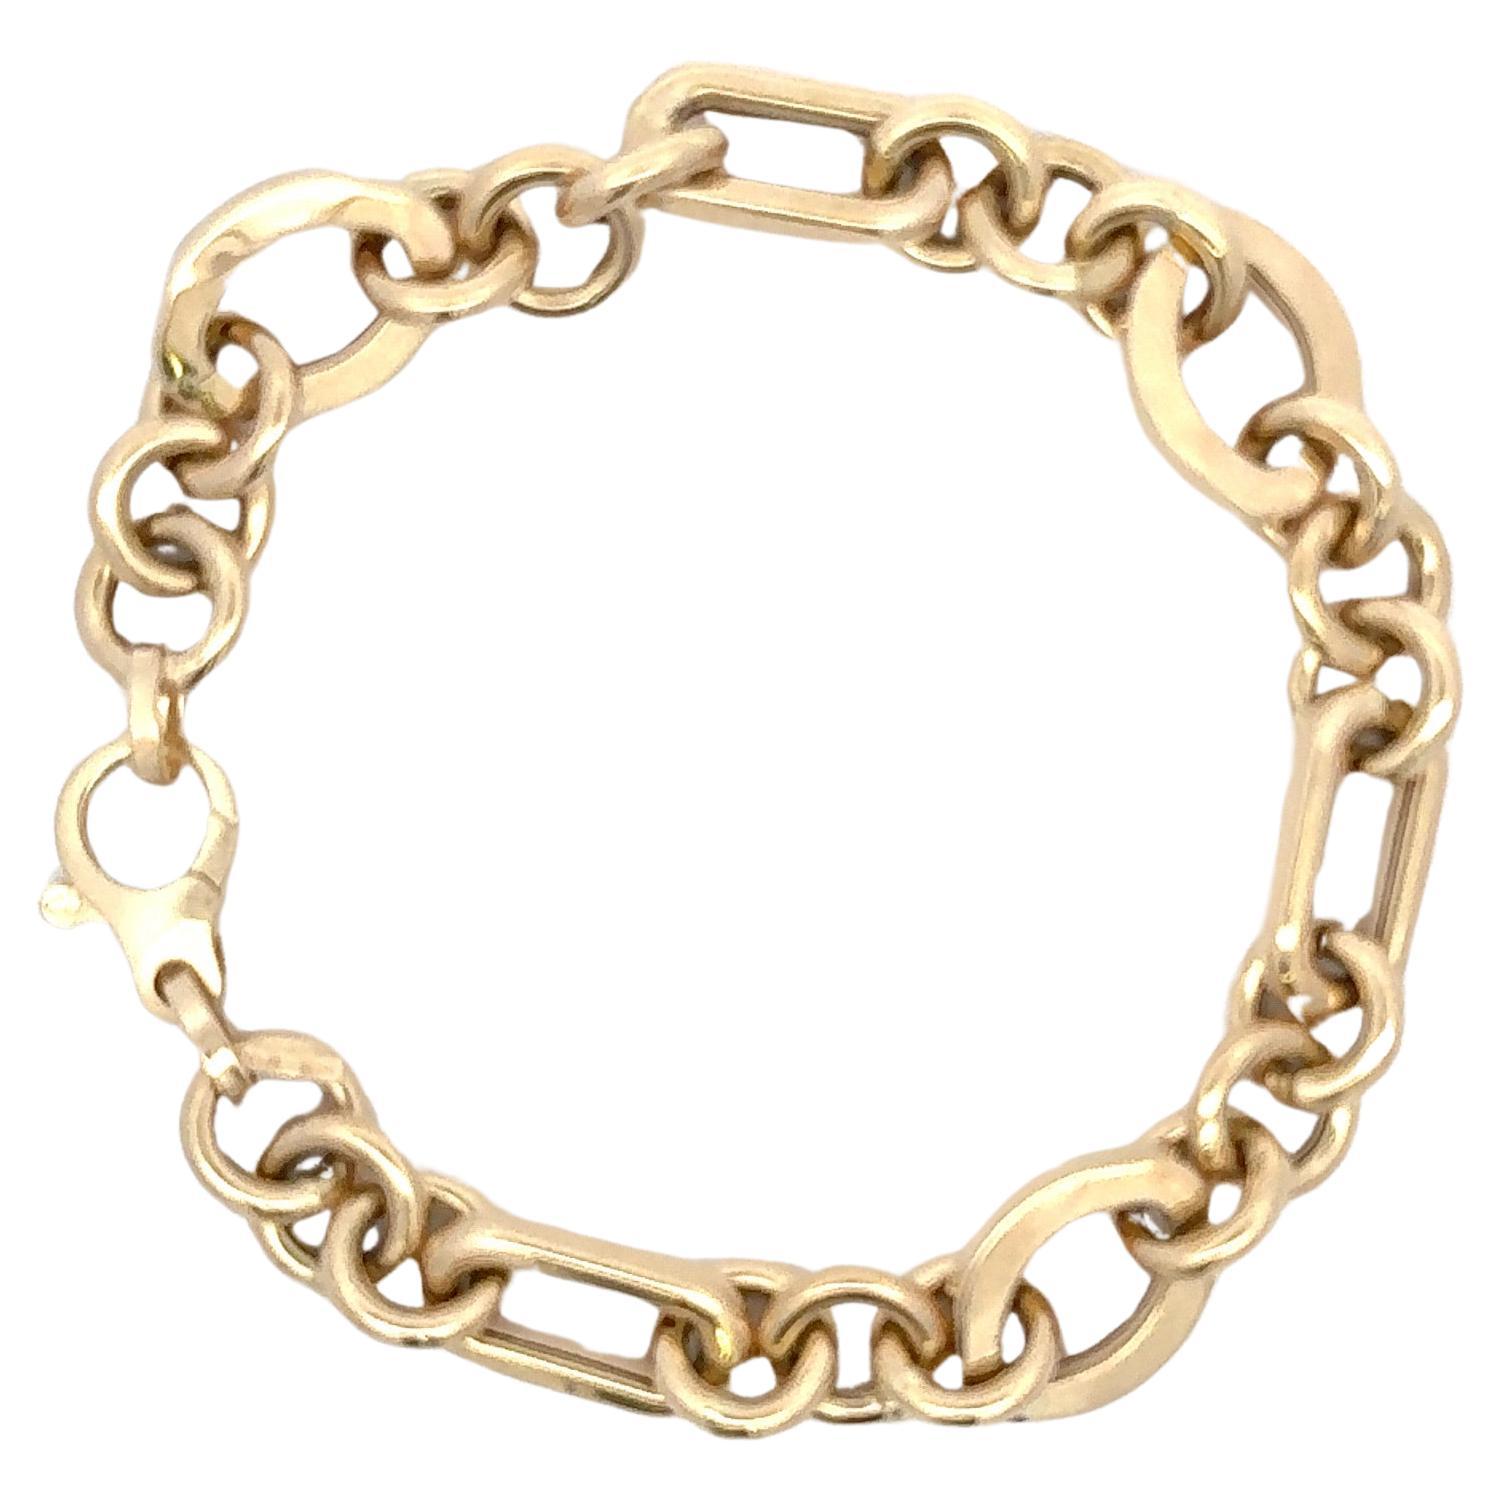 Made in Italy, this 14 karat yellow gold bracelet features three different links - round, oval and paperclip motifs weighing 9.7 grams.